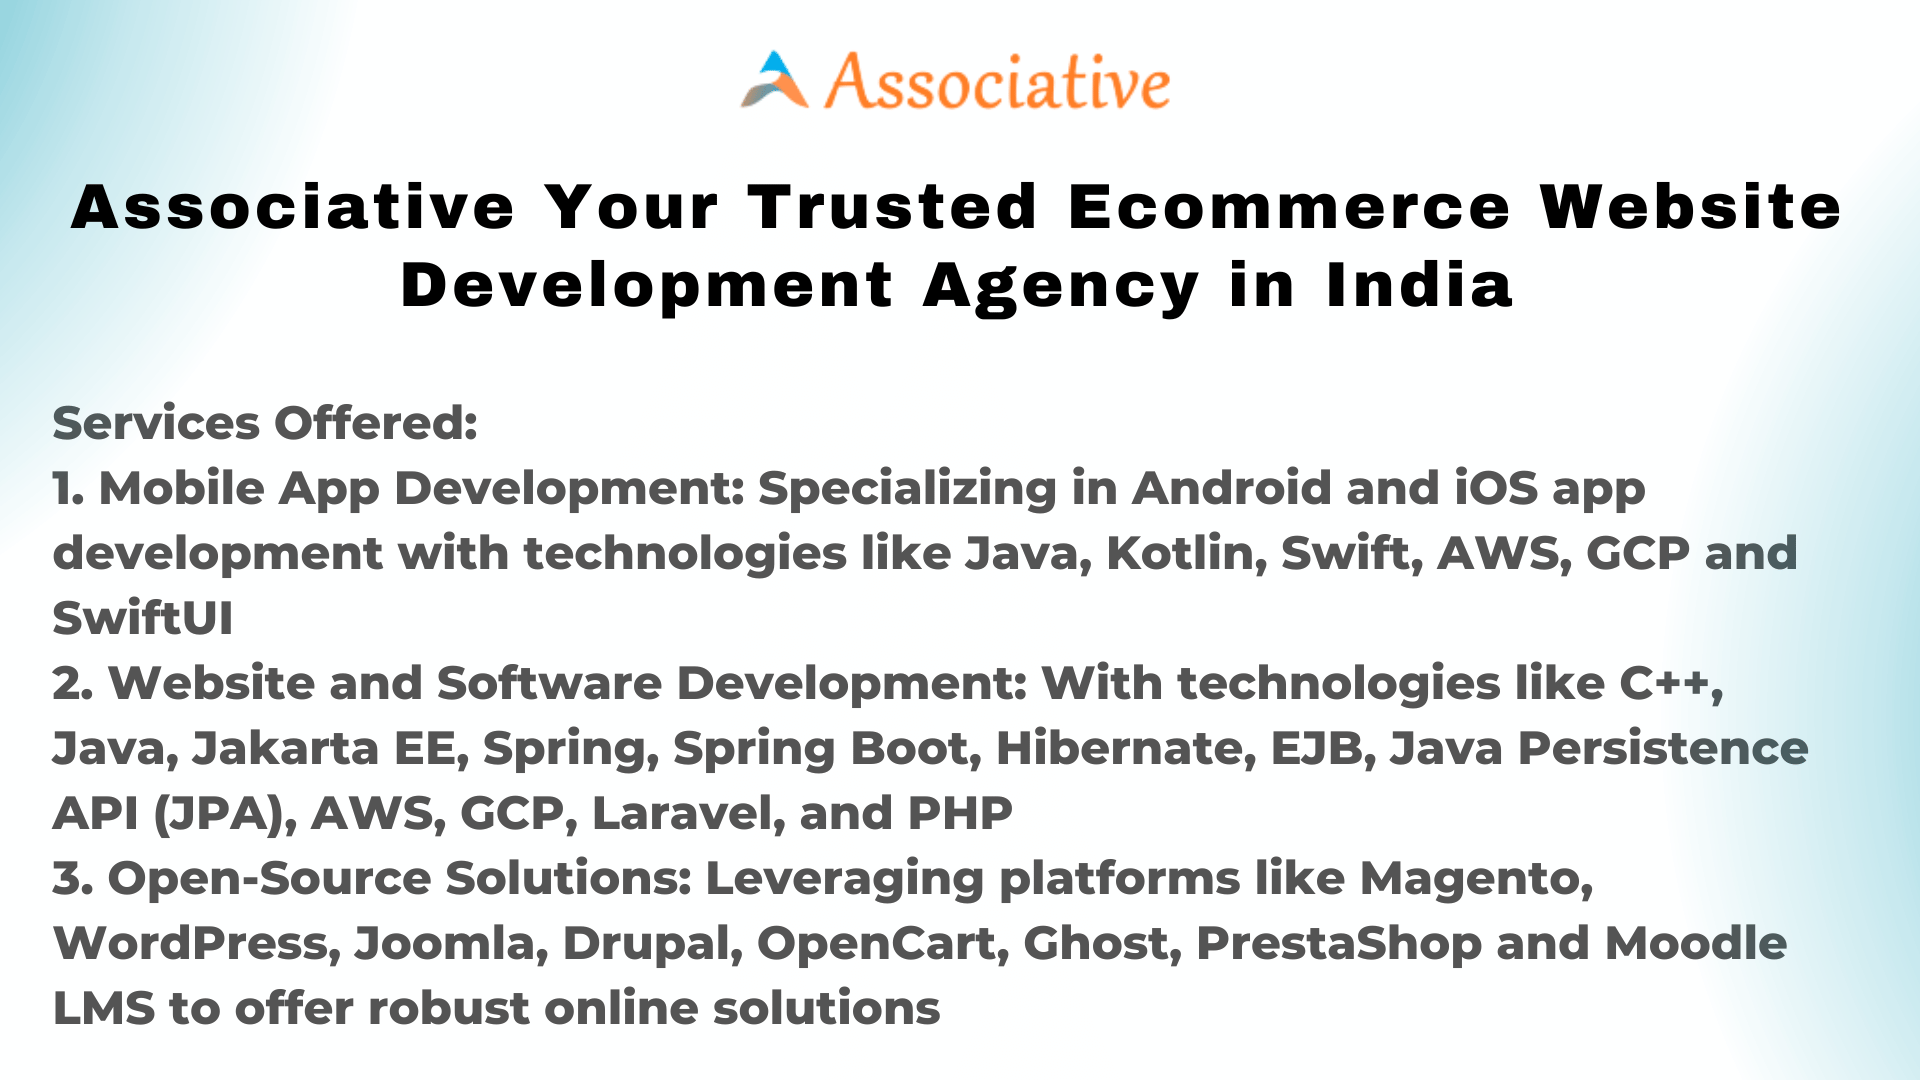 Associative Your Trusted Ecommerce Website Development Agency in India